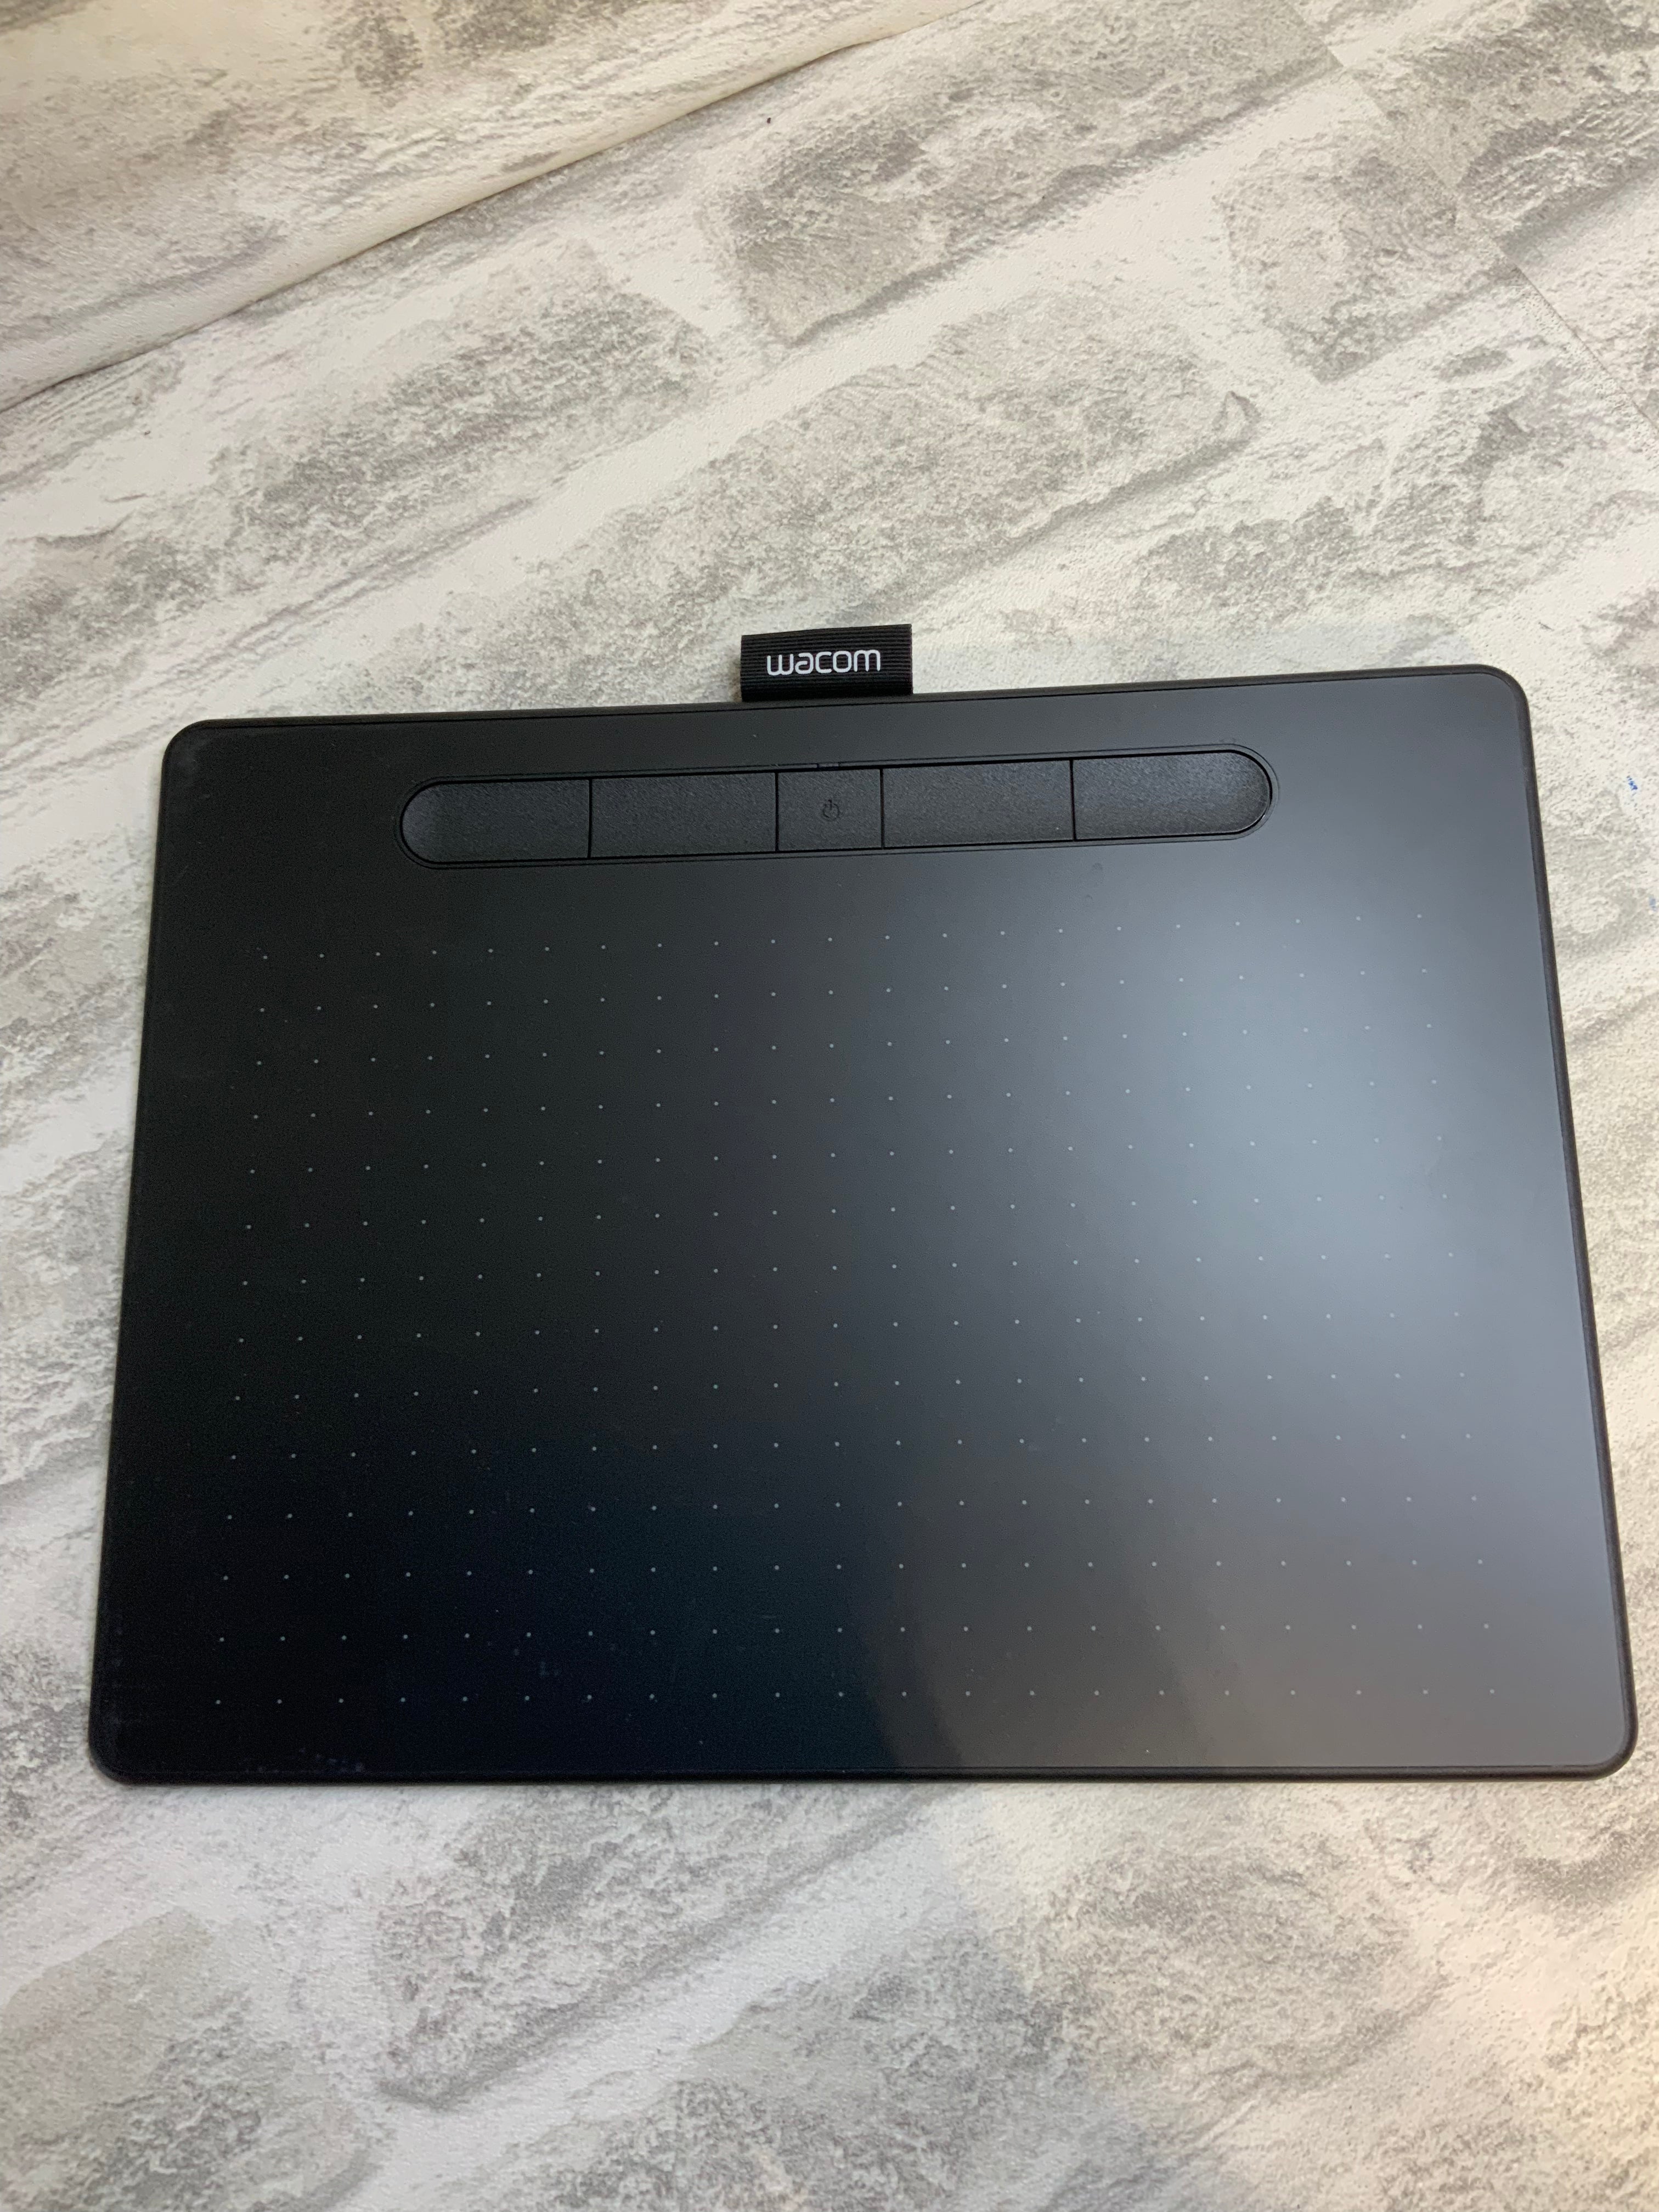 Wacom Intuos Wireless Graphics Drawing Tablet with Software Included - Black (7576787026158)